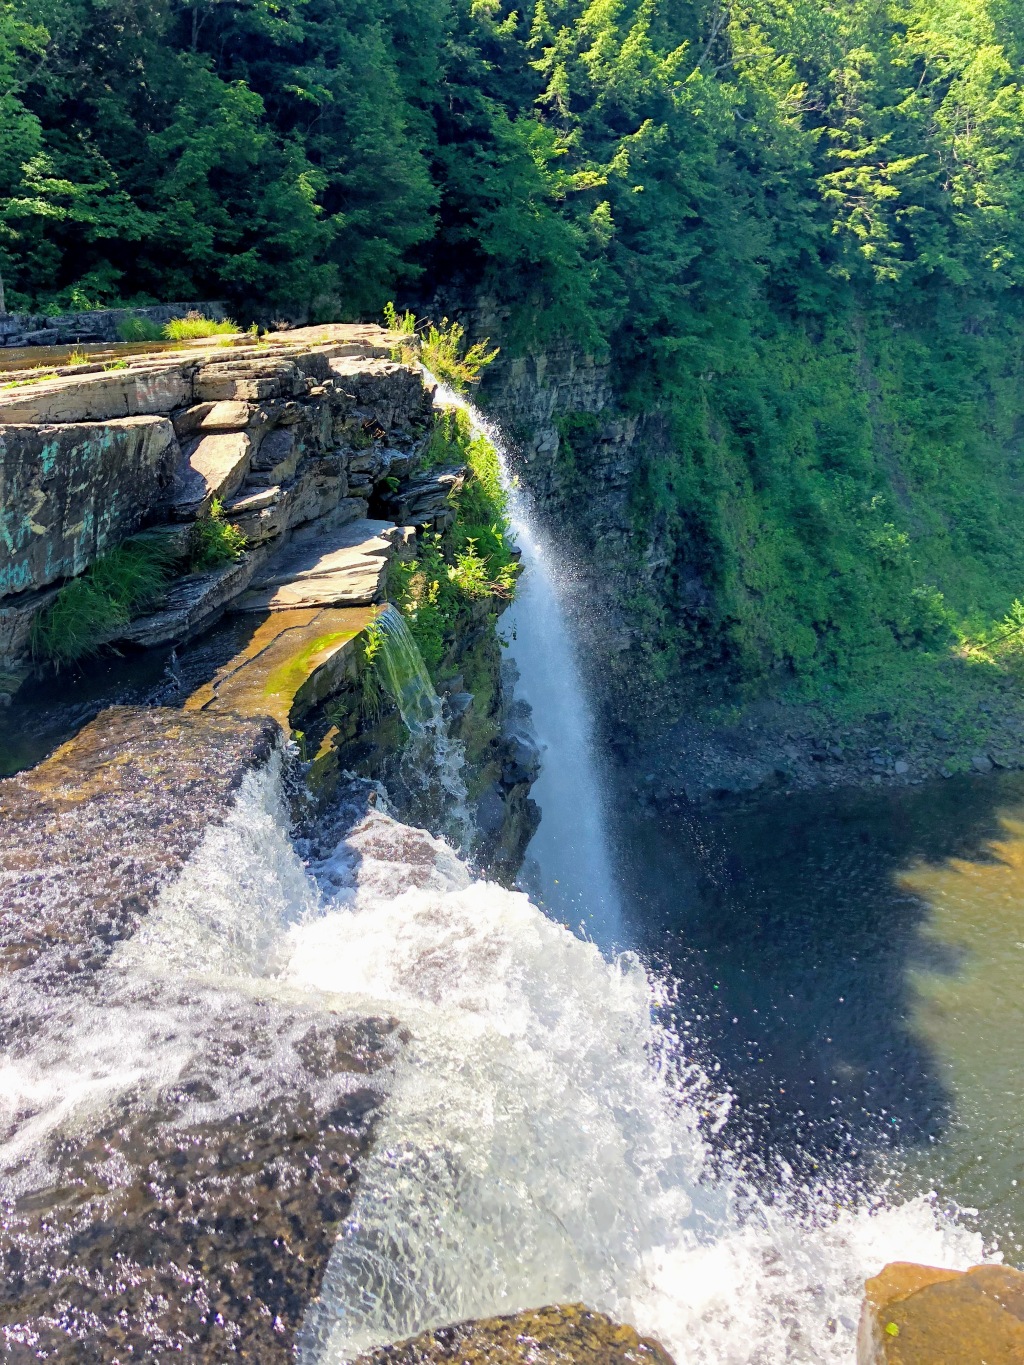 Day Trip to Salmon River Falls in Upstate New York